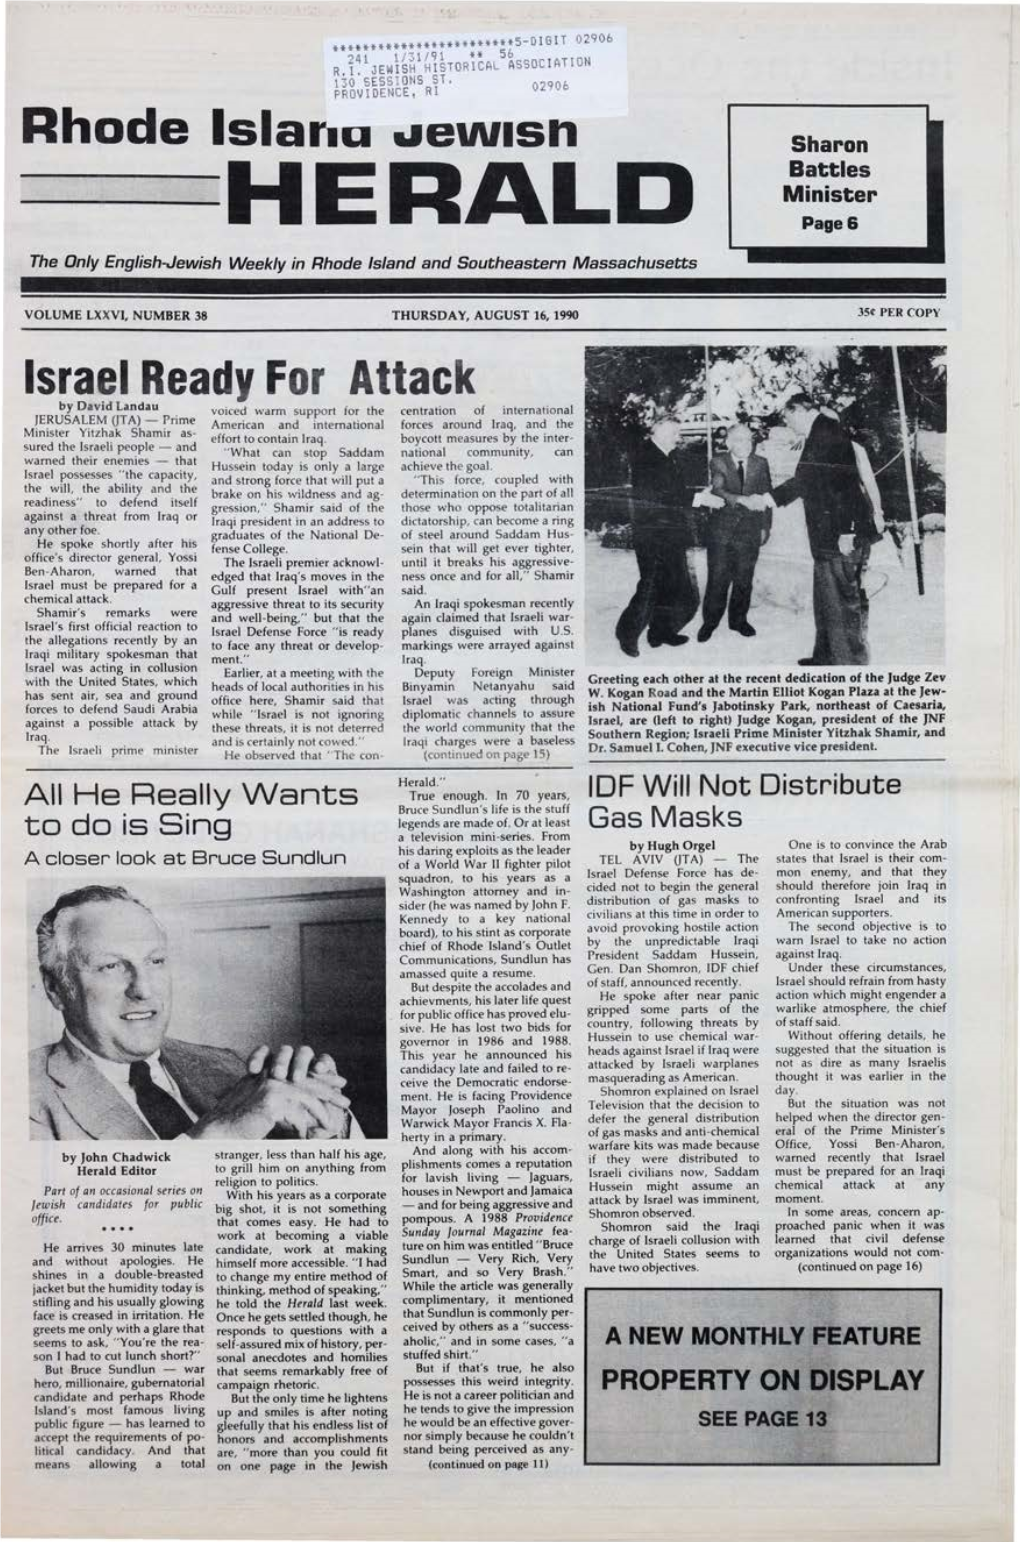 HERALD Page& the Only English-Jewish Weekly in Rhode Island and Southeastern Massachusetts